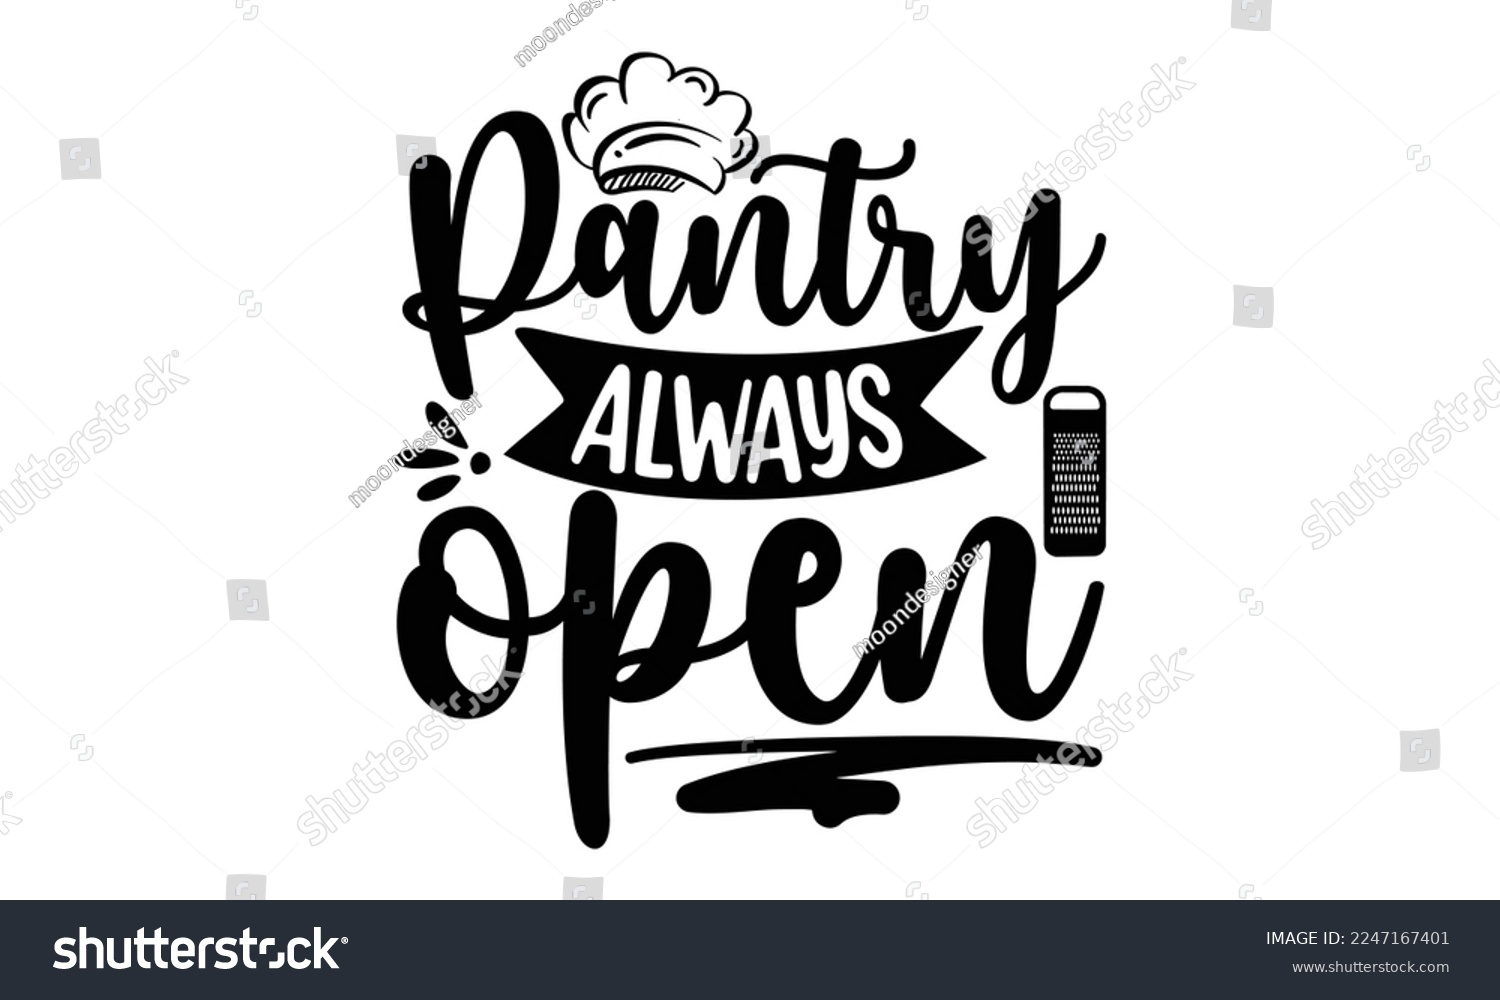 SVG of PANTRY ALWAYS OPEN, Cooking t shirt design,  svg Files for Cutting and Silhouette, and Hand drawn lettering phrase, restaurant, logo, bakery, street festival, kitchen decor eps 10 svg